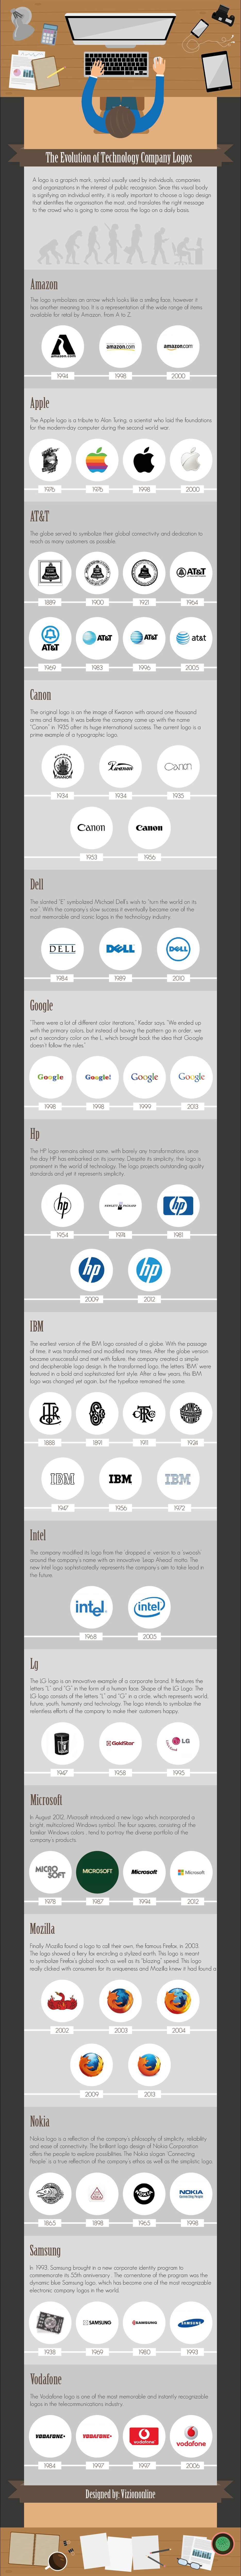 The Evolution of Technology Company Logos by VizionOnline